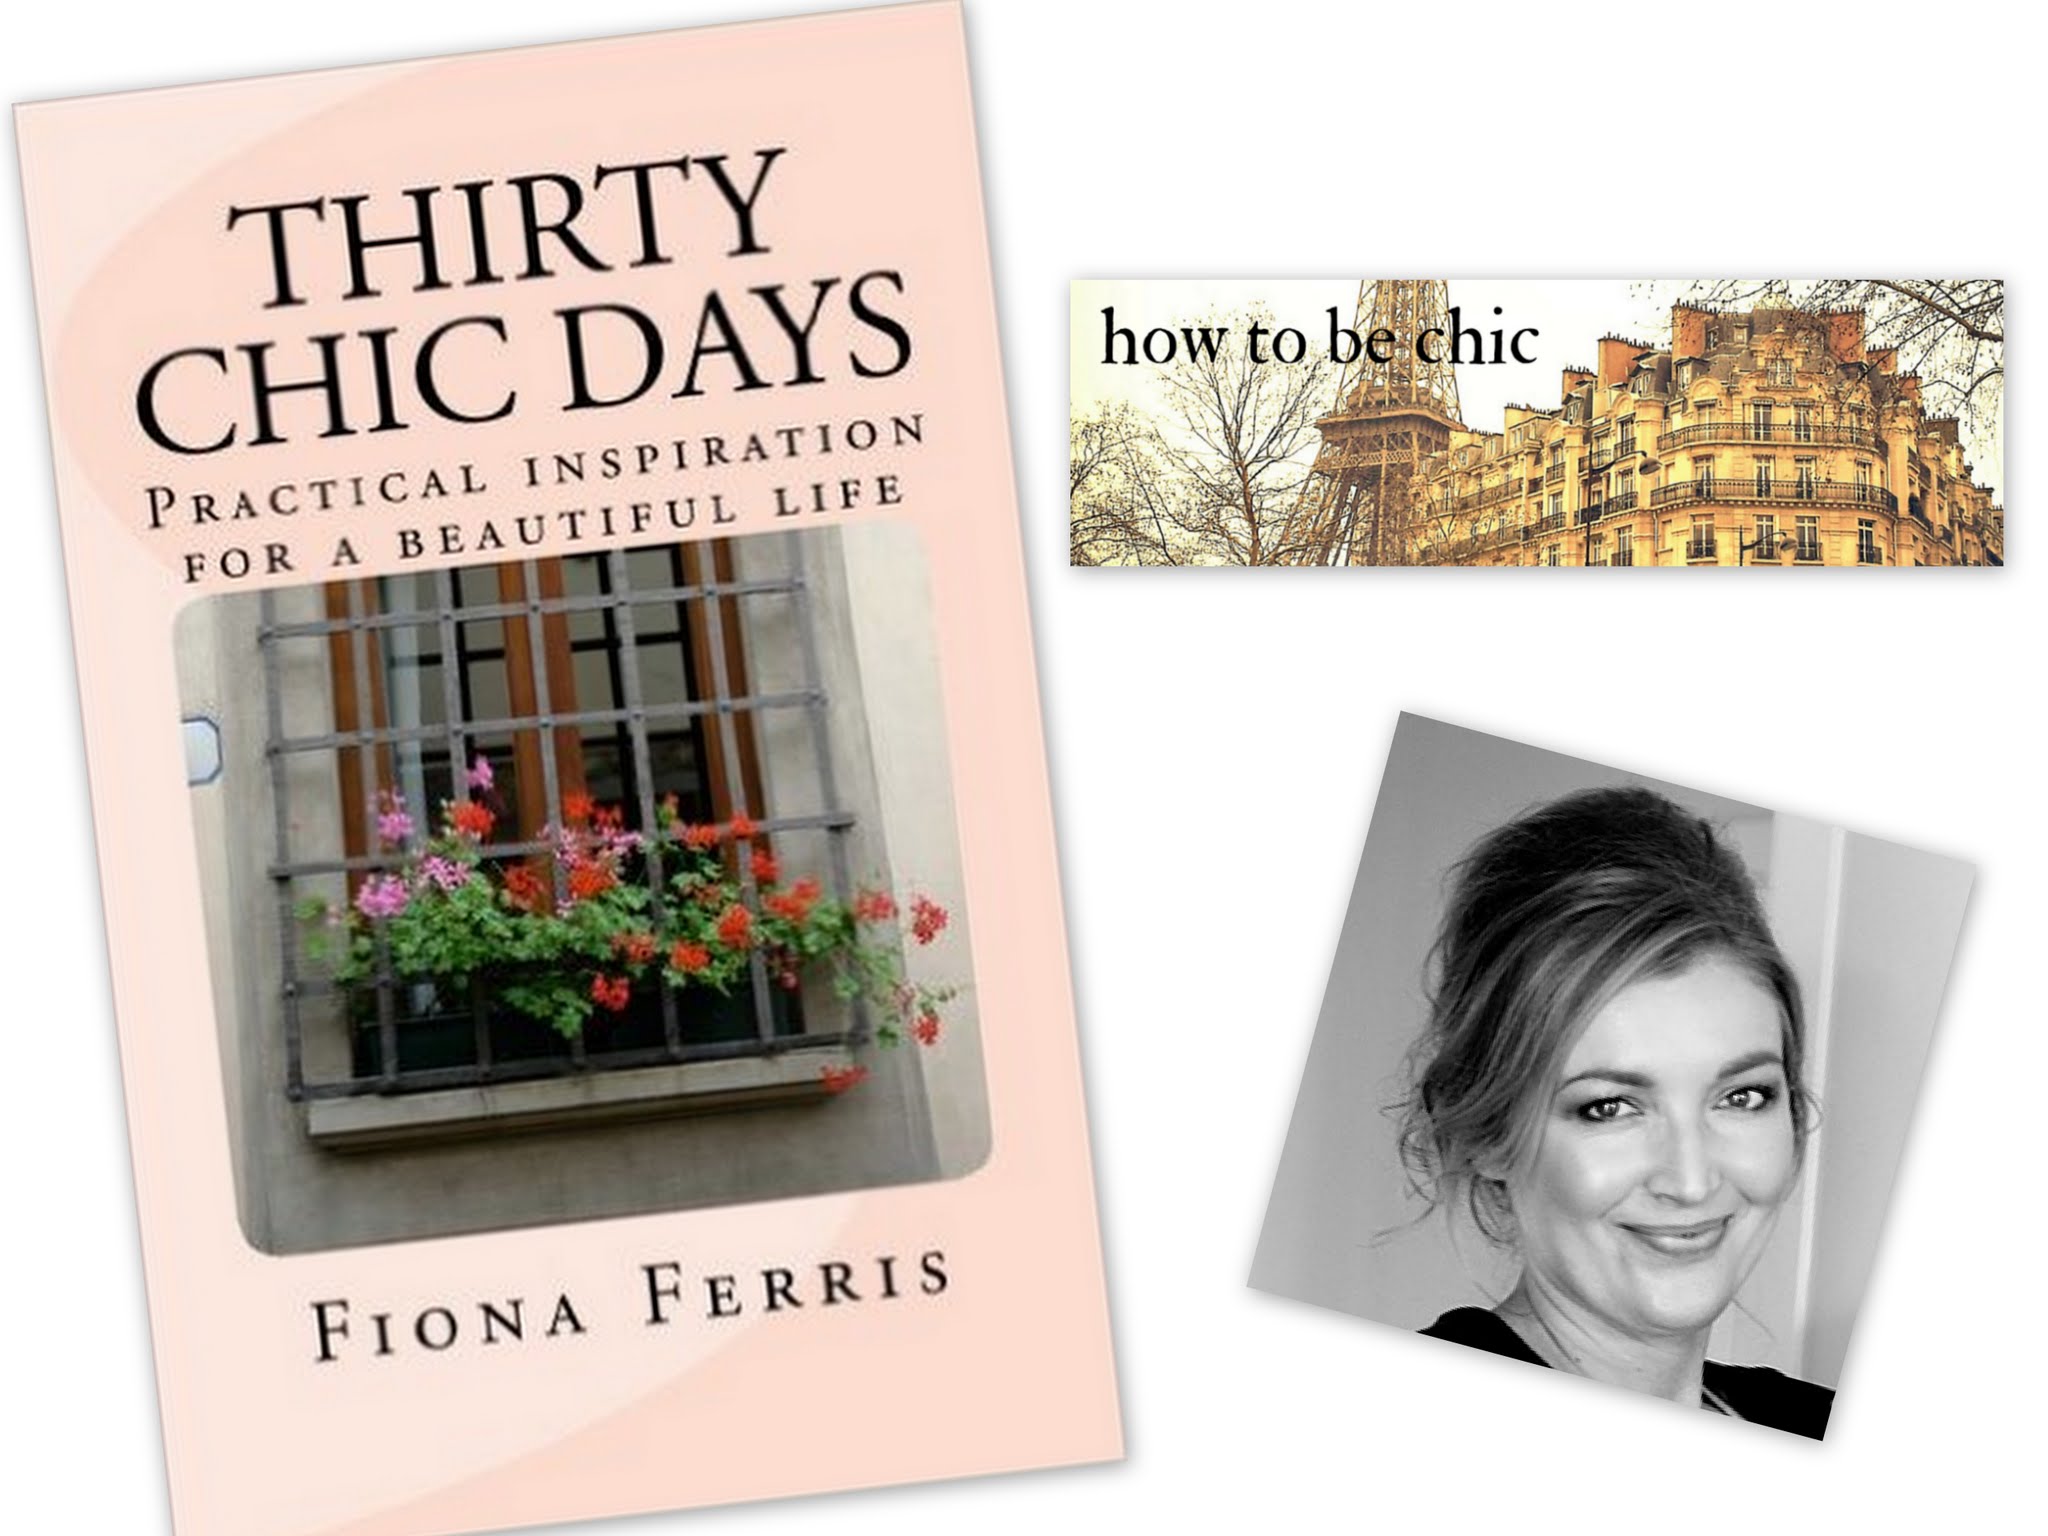 How to Be Chic with Fiona Ferris